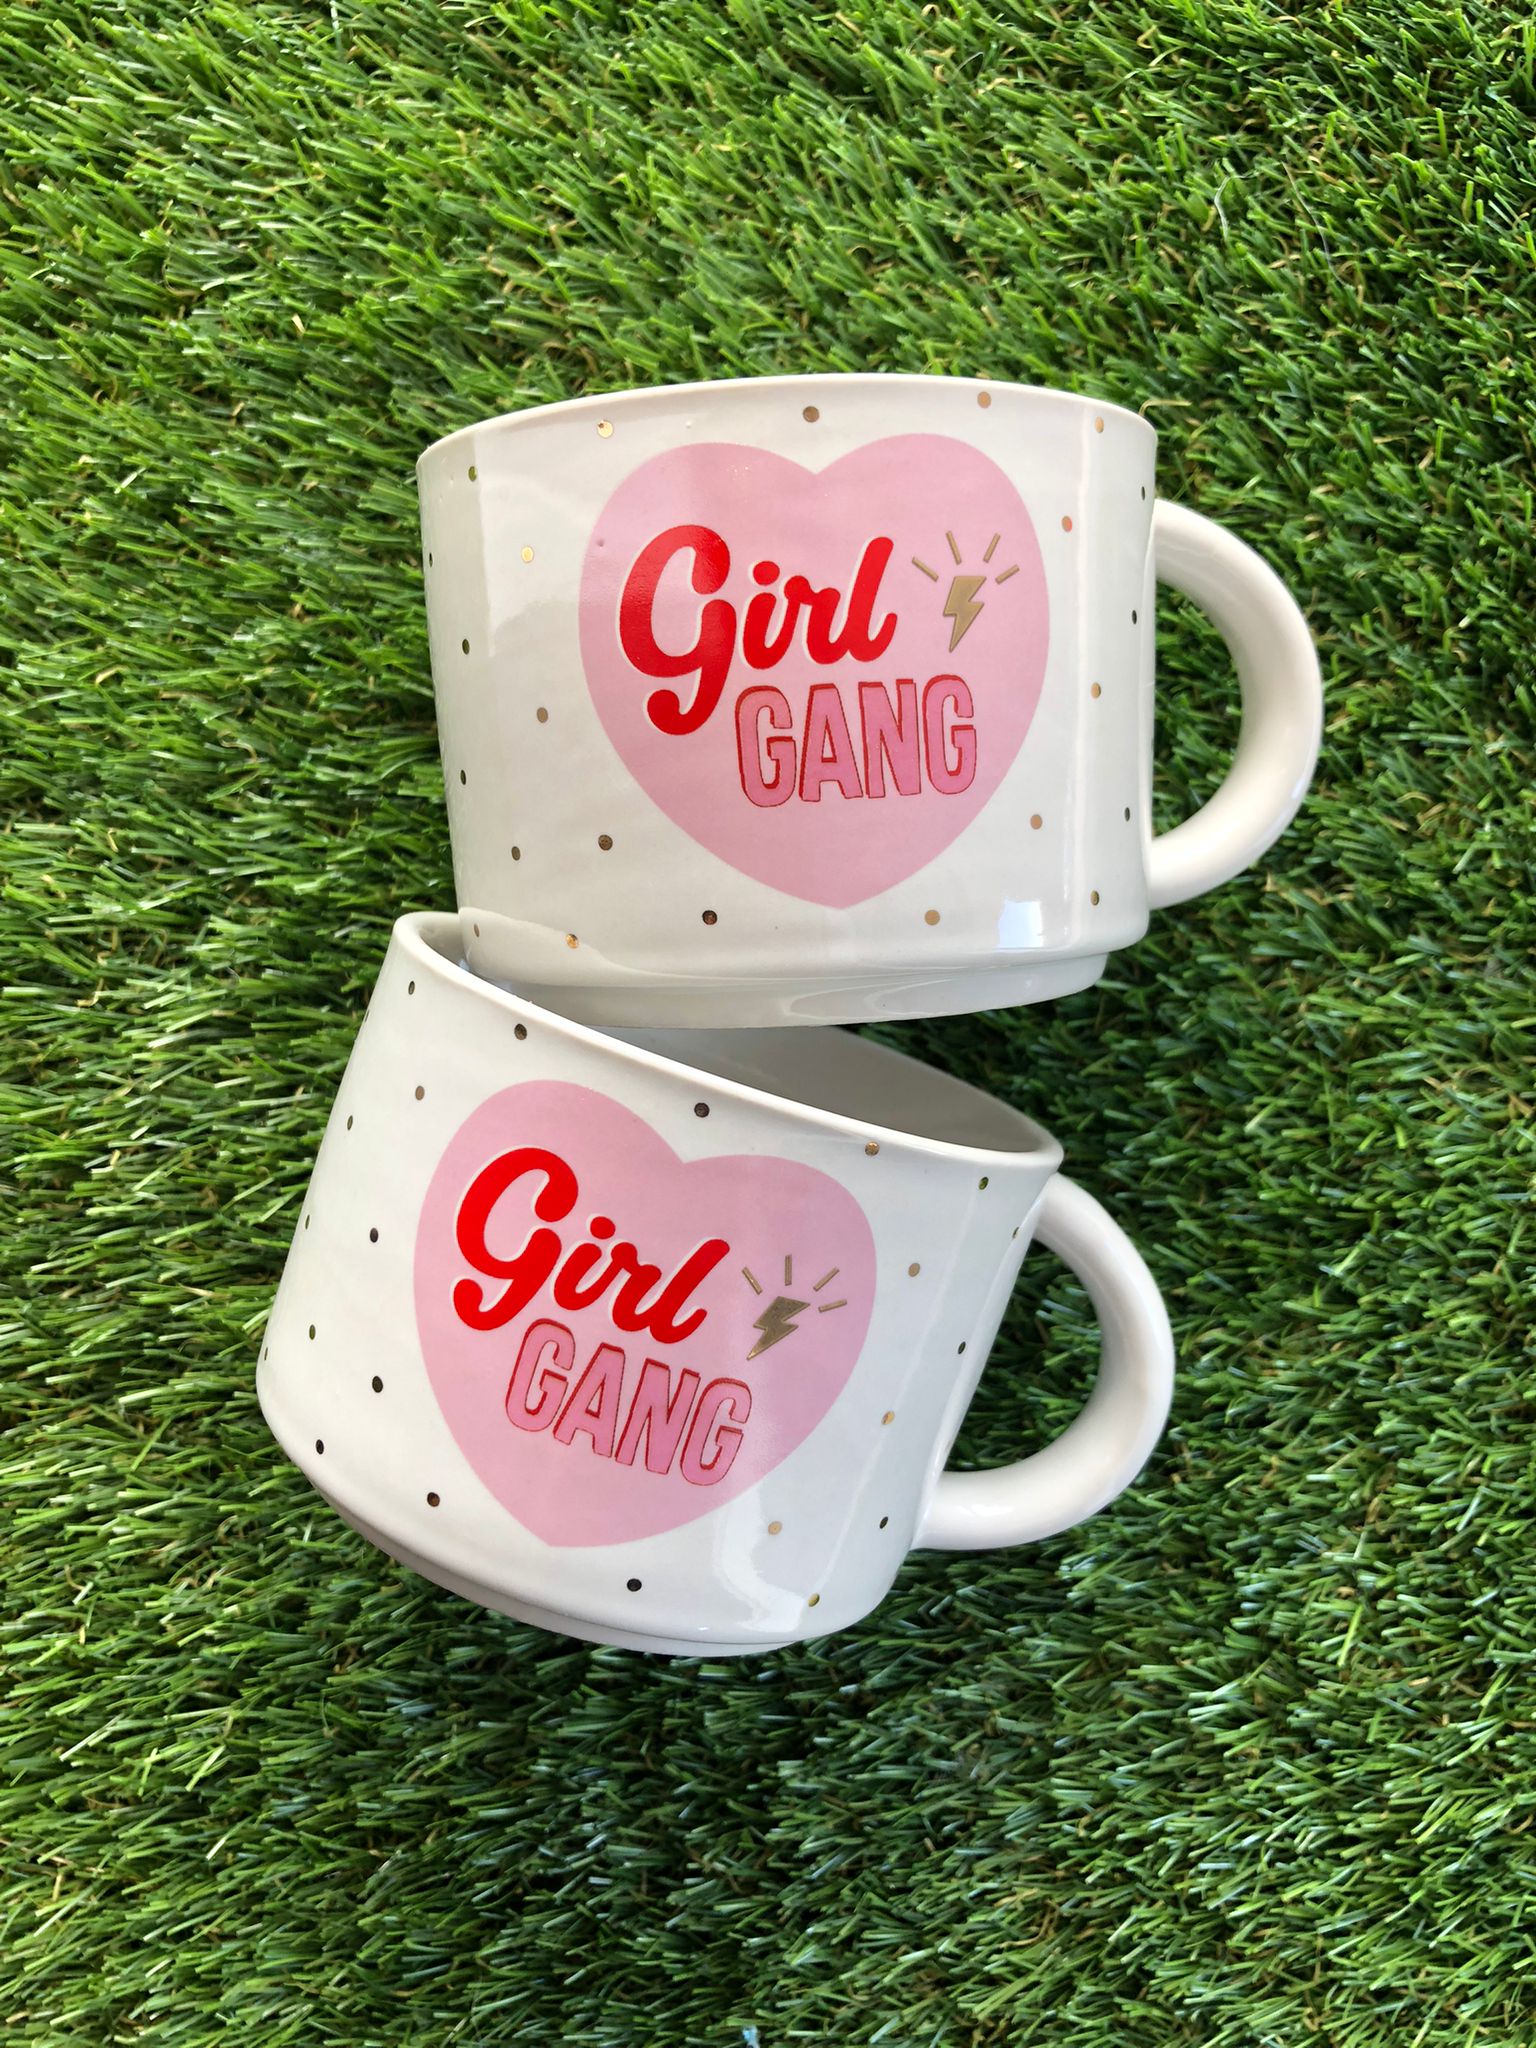 Sass & Belle - Girl Power stacking mugs. Perfect for a gift or just for yourself! Girl gang.